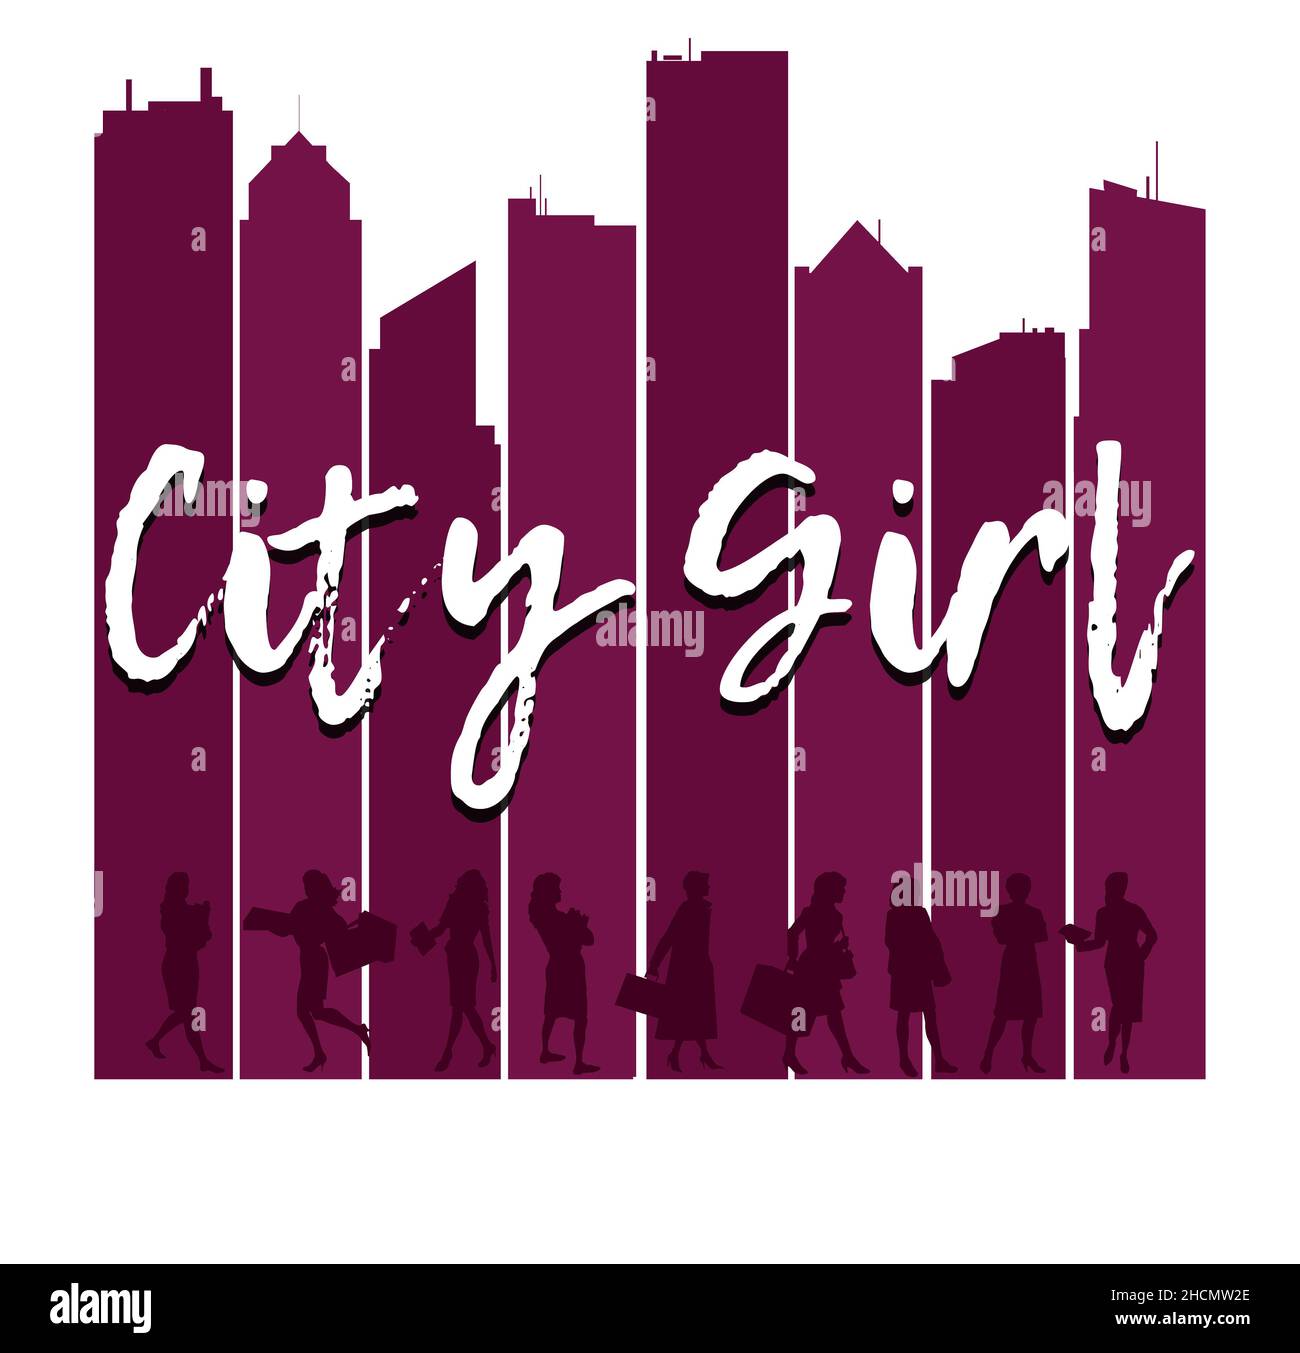 City girls are seen silhouetted against an urban skyline in this 3-d illustration. Stock Photo